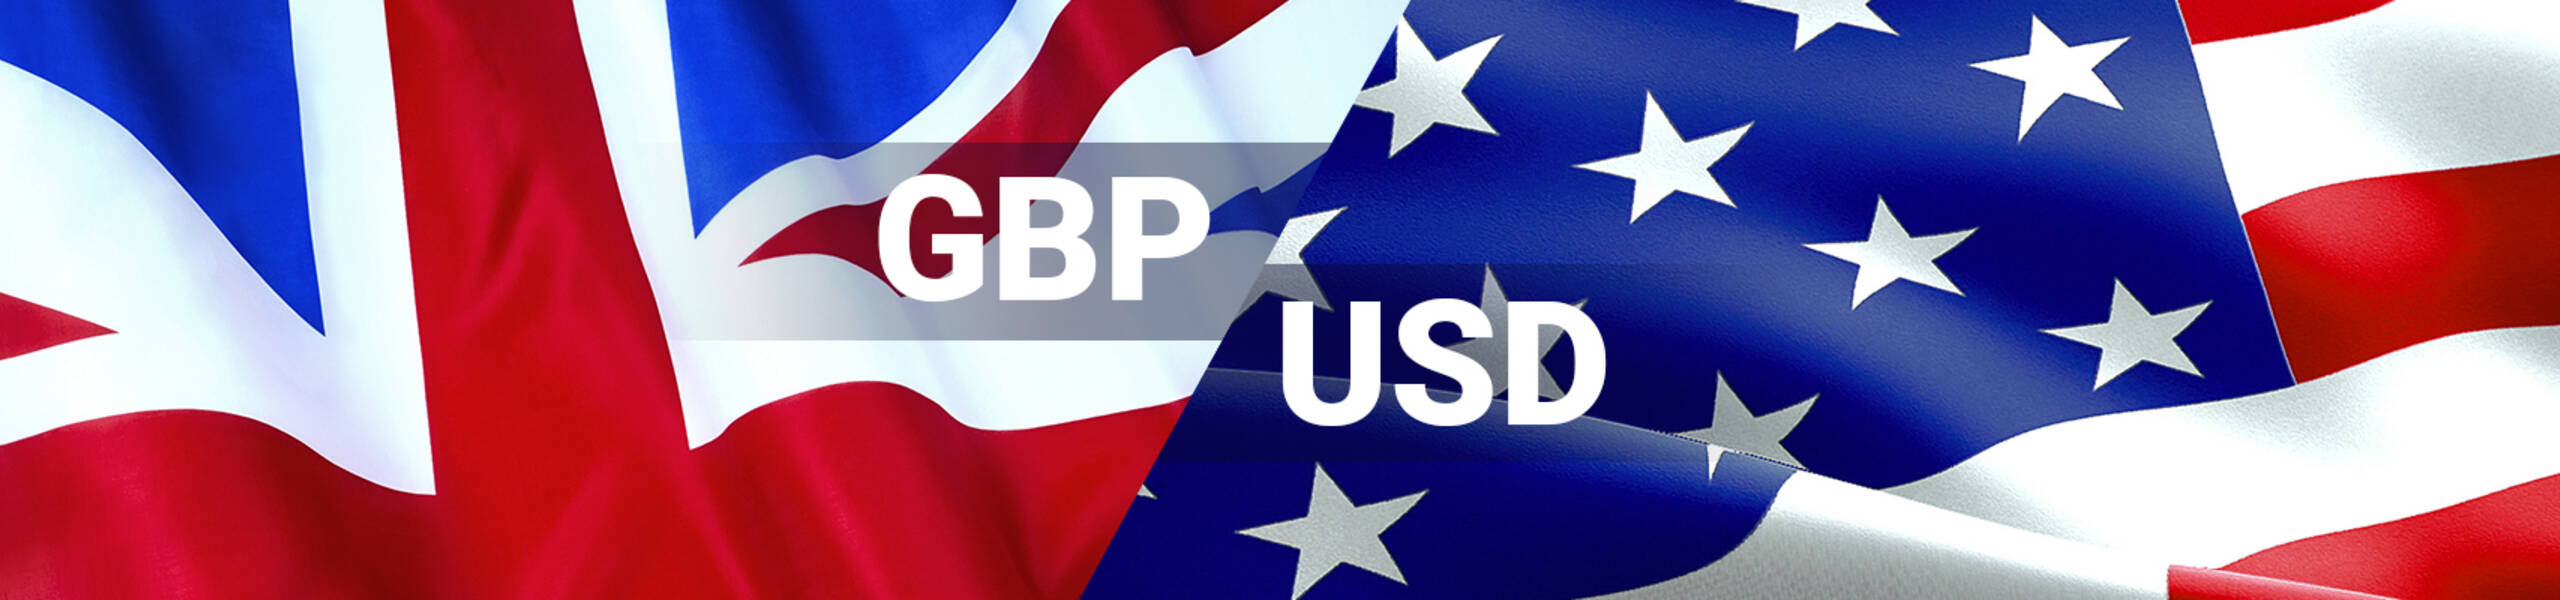 GBP/USD: pound is looking for support of SSB